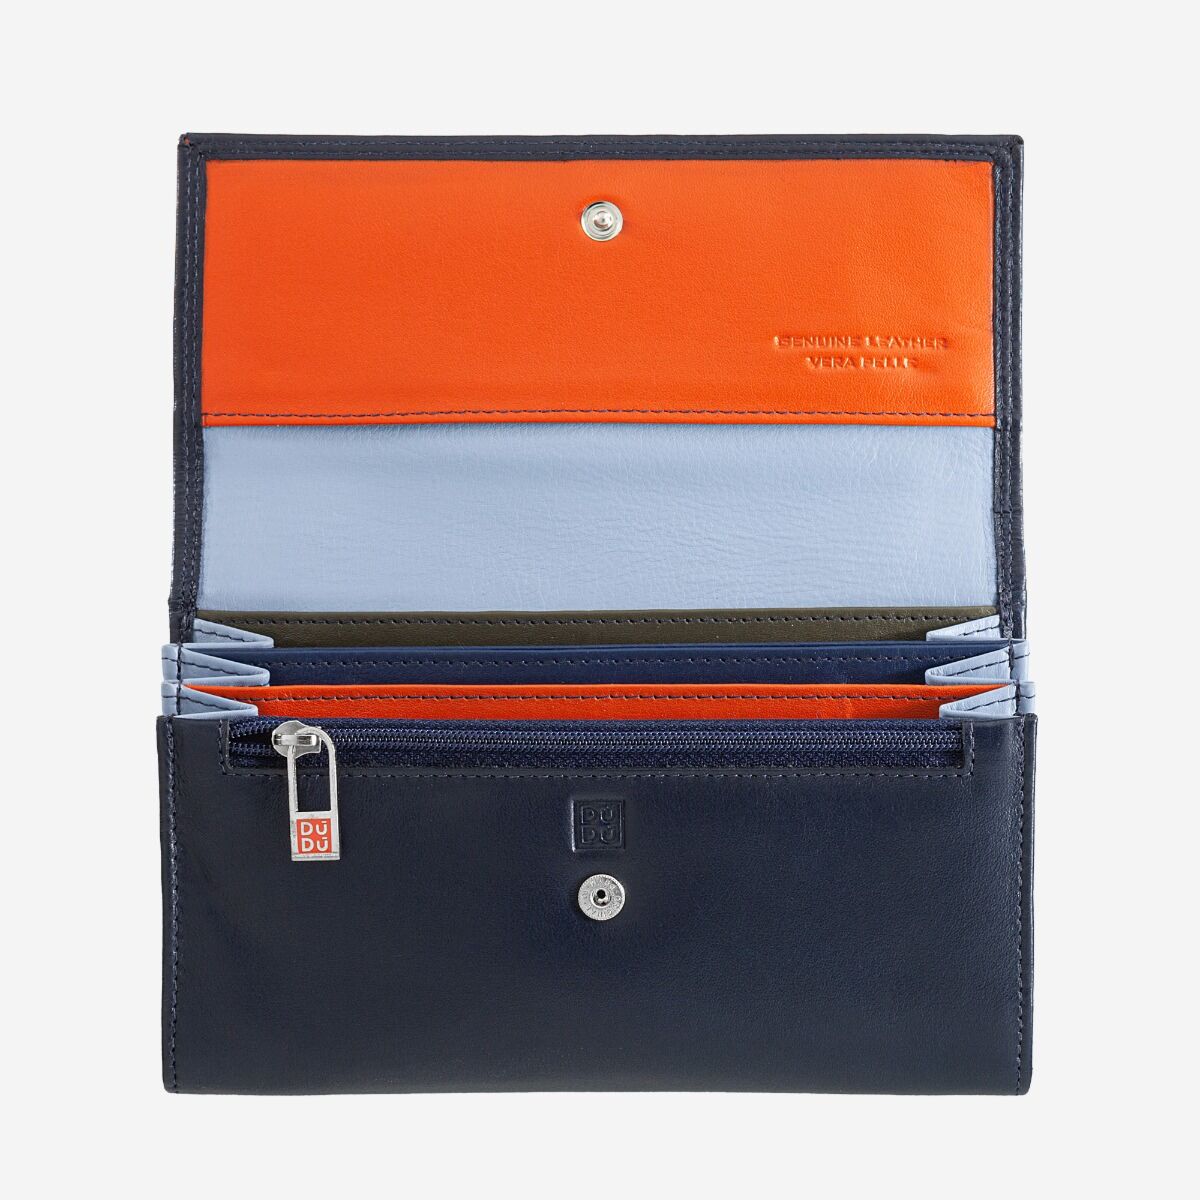 DuDu Womans leather multi color wallet with flap - Navy